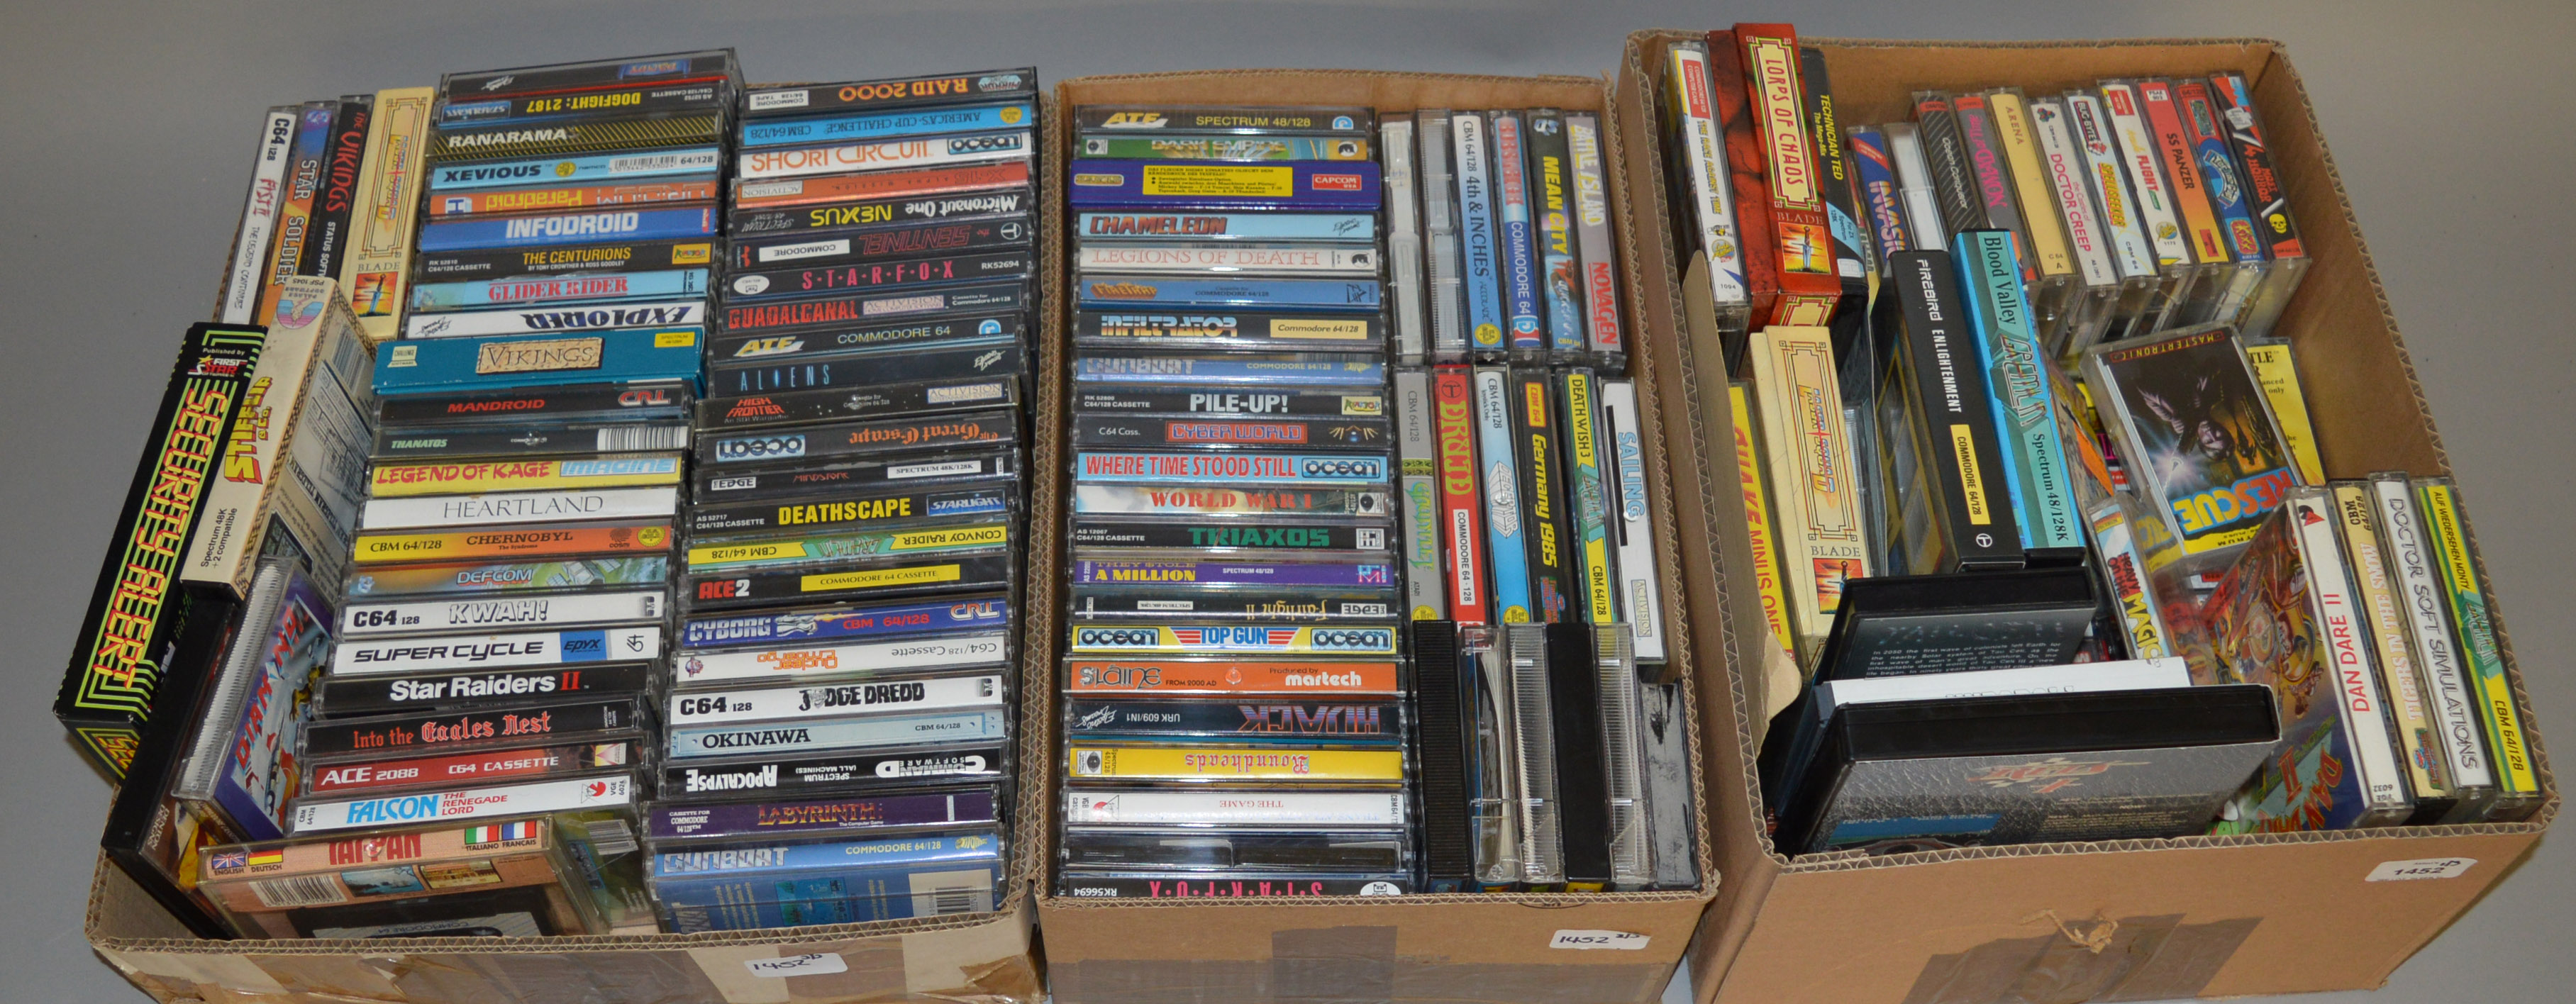 Approximately 180 Commodore 64 and Spectrum games, which includes; Goonies, Labyrinth, Aliens, Short